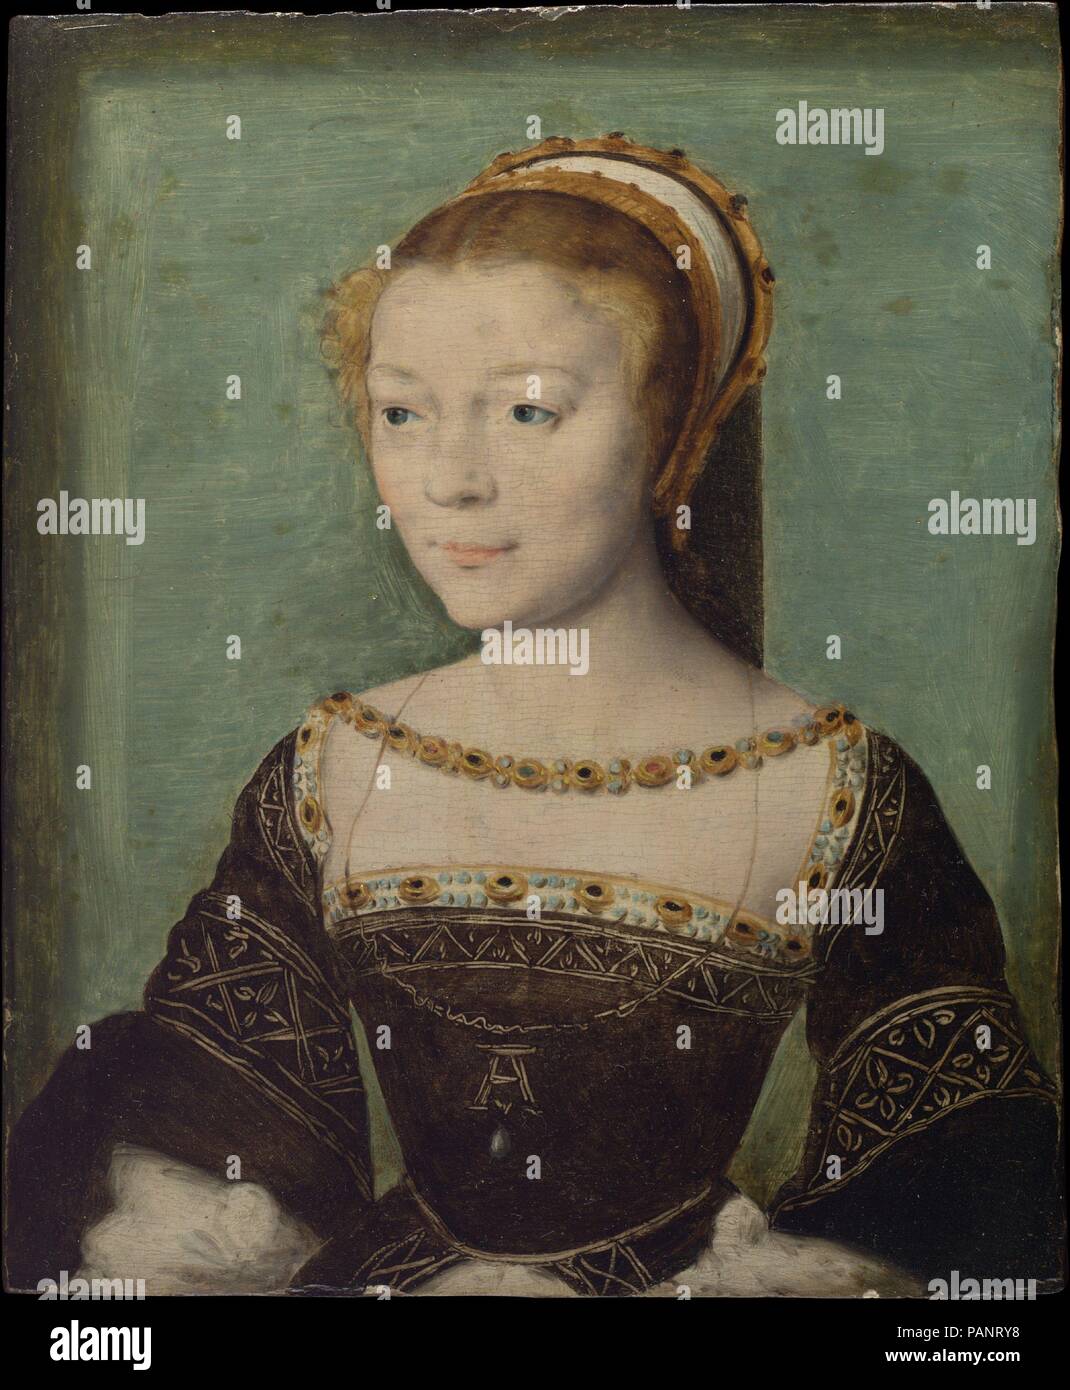 Anne de Pisseleu (1508-1576), Duchesse d'Étampes. Artist: Attributed to Corneille de Lyon (Netherlandish, The Hague, active by 1533-died 1575 Lyons). Dimensions: 7 x 5 5/8 in. (17.8 x 14.3 cm). Date: ca. 1535-40.    Renowned for her brilliance and beauty, Anne de Pisseleu was the mistress of Francis I. She was introduced to the king at court in 1526 when she was seventeen. After his death in 1547, she was dismissed from court by the mistress of the succeeding king (Henry II), and died in obscurity. Here she wears a gold necklace and a pendant with her initial 'A' and a pearl. Museum: Metropoli Stock Photo